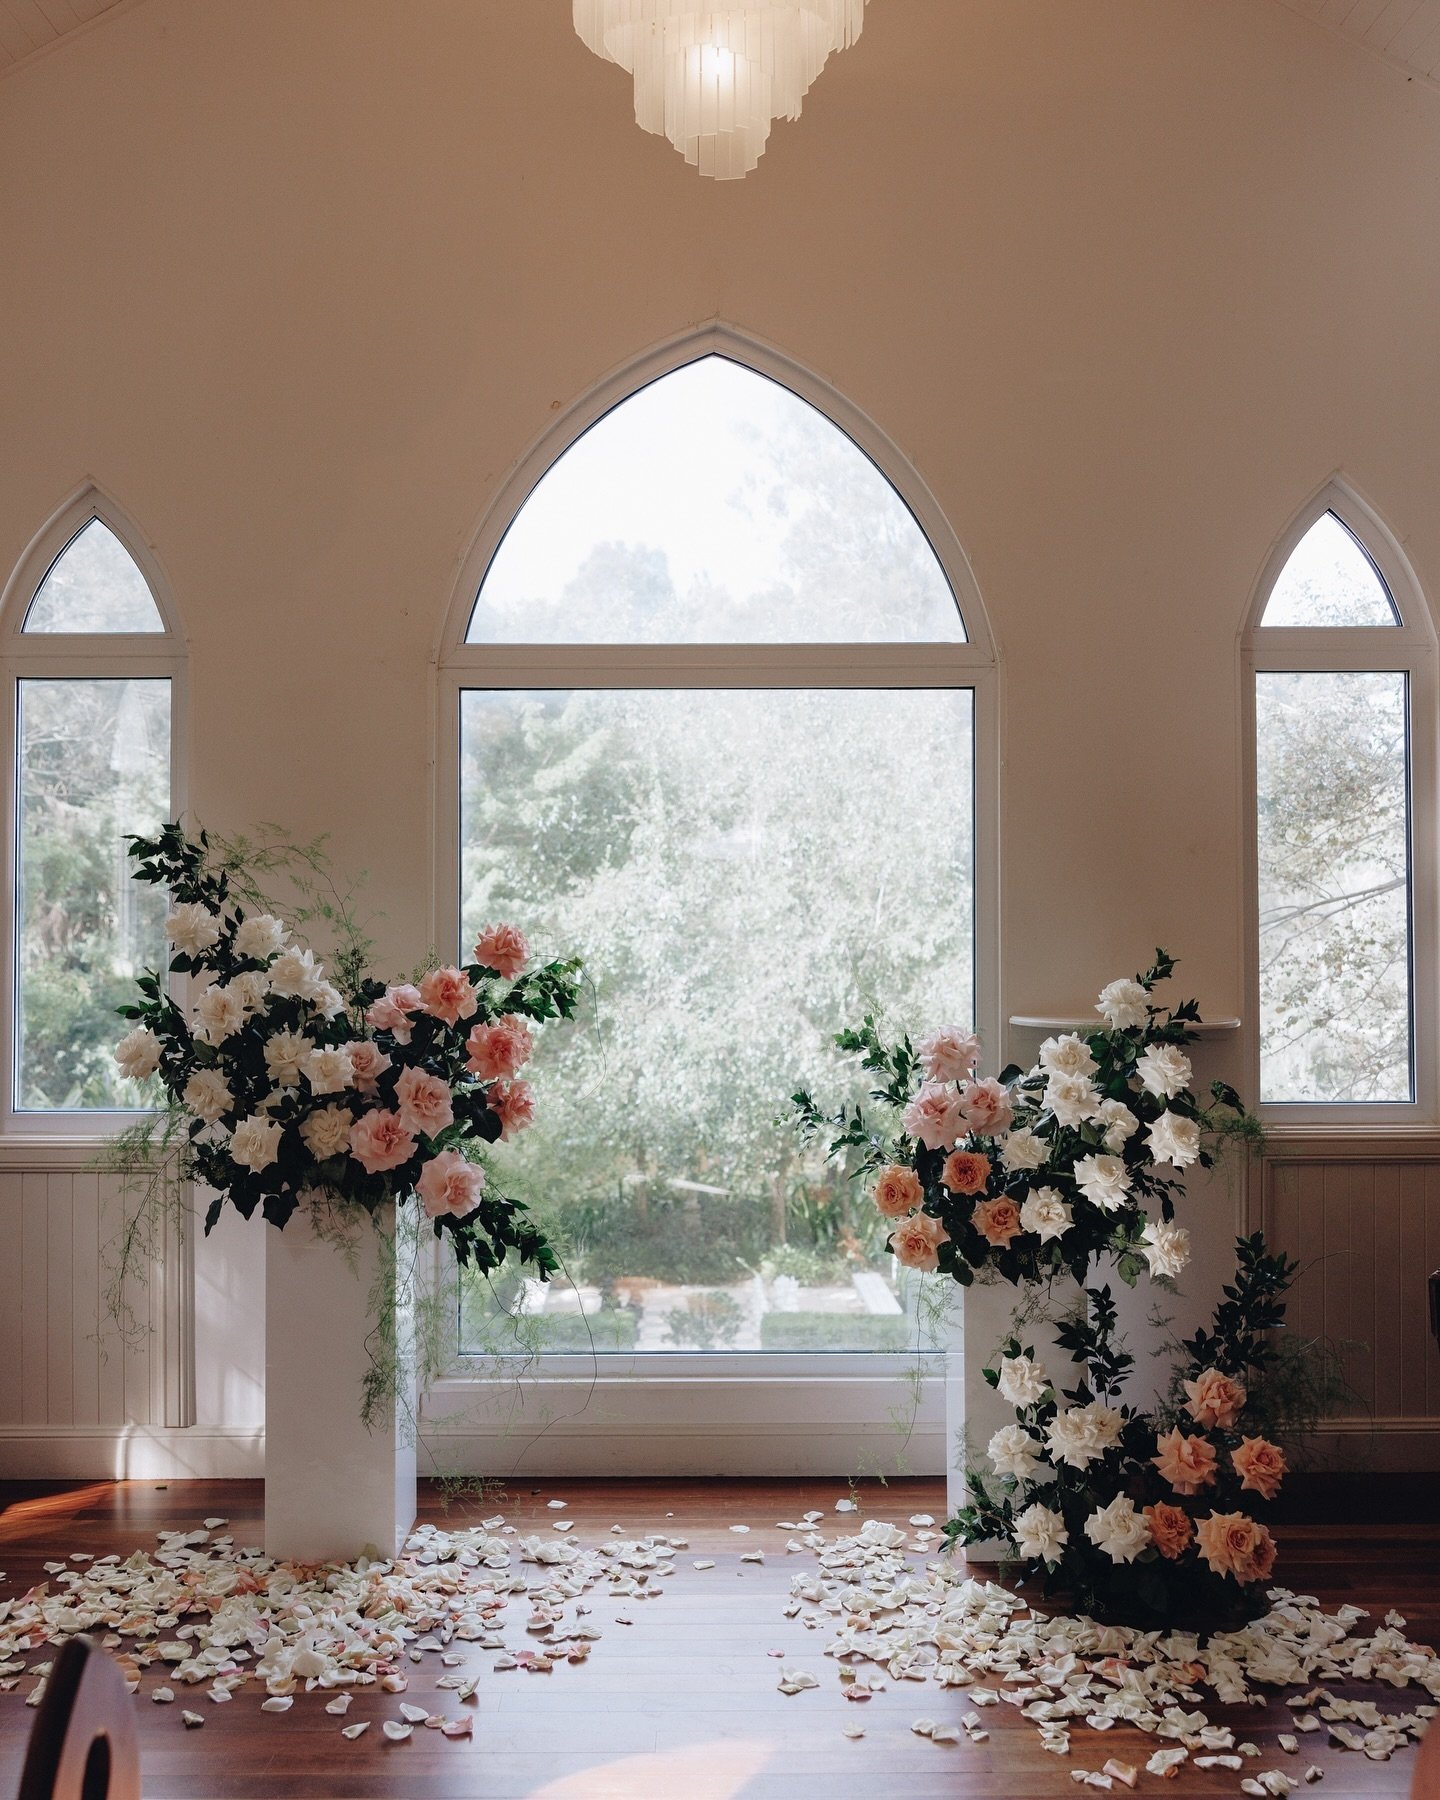 🎙️We may have skipped April but we&rsquo;re back with an end of May blog! All about the differences between having an indoor and outdoor ceremony! The link is in our bio 🤍 &mdash; #weddingblog 
.
.
.
.
.
.
#brisbanebride #brisbanewedding #australia